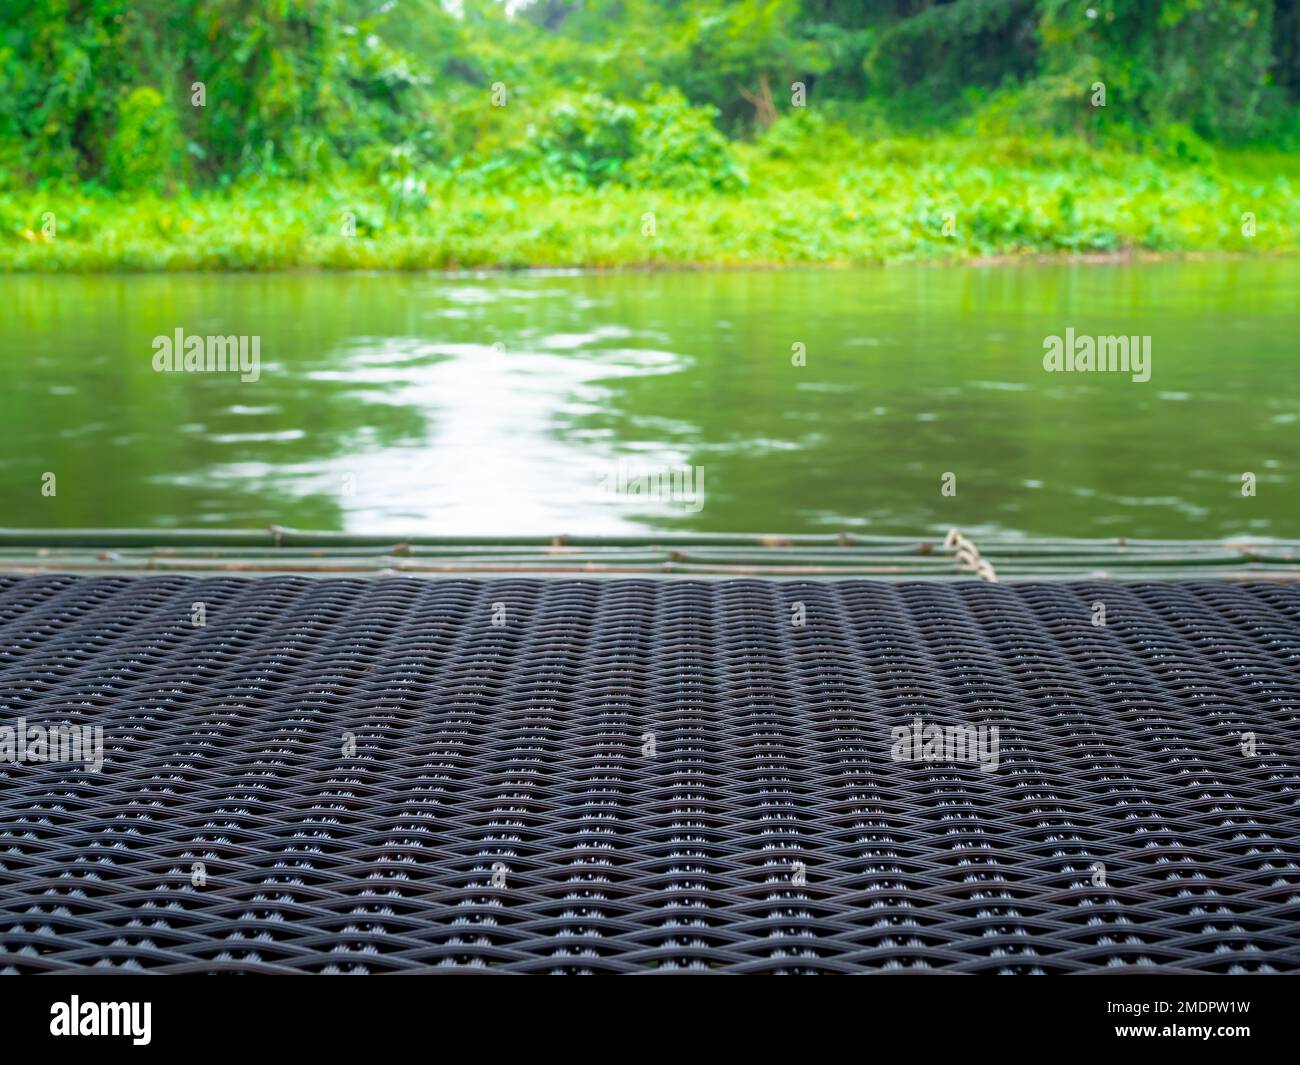 Close-up empty blank space on surface of rattan weave bed, furniture on stream river view with green forest background. Natural green background for s Stock Photo